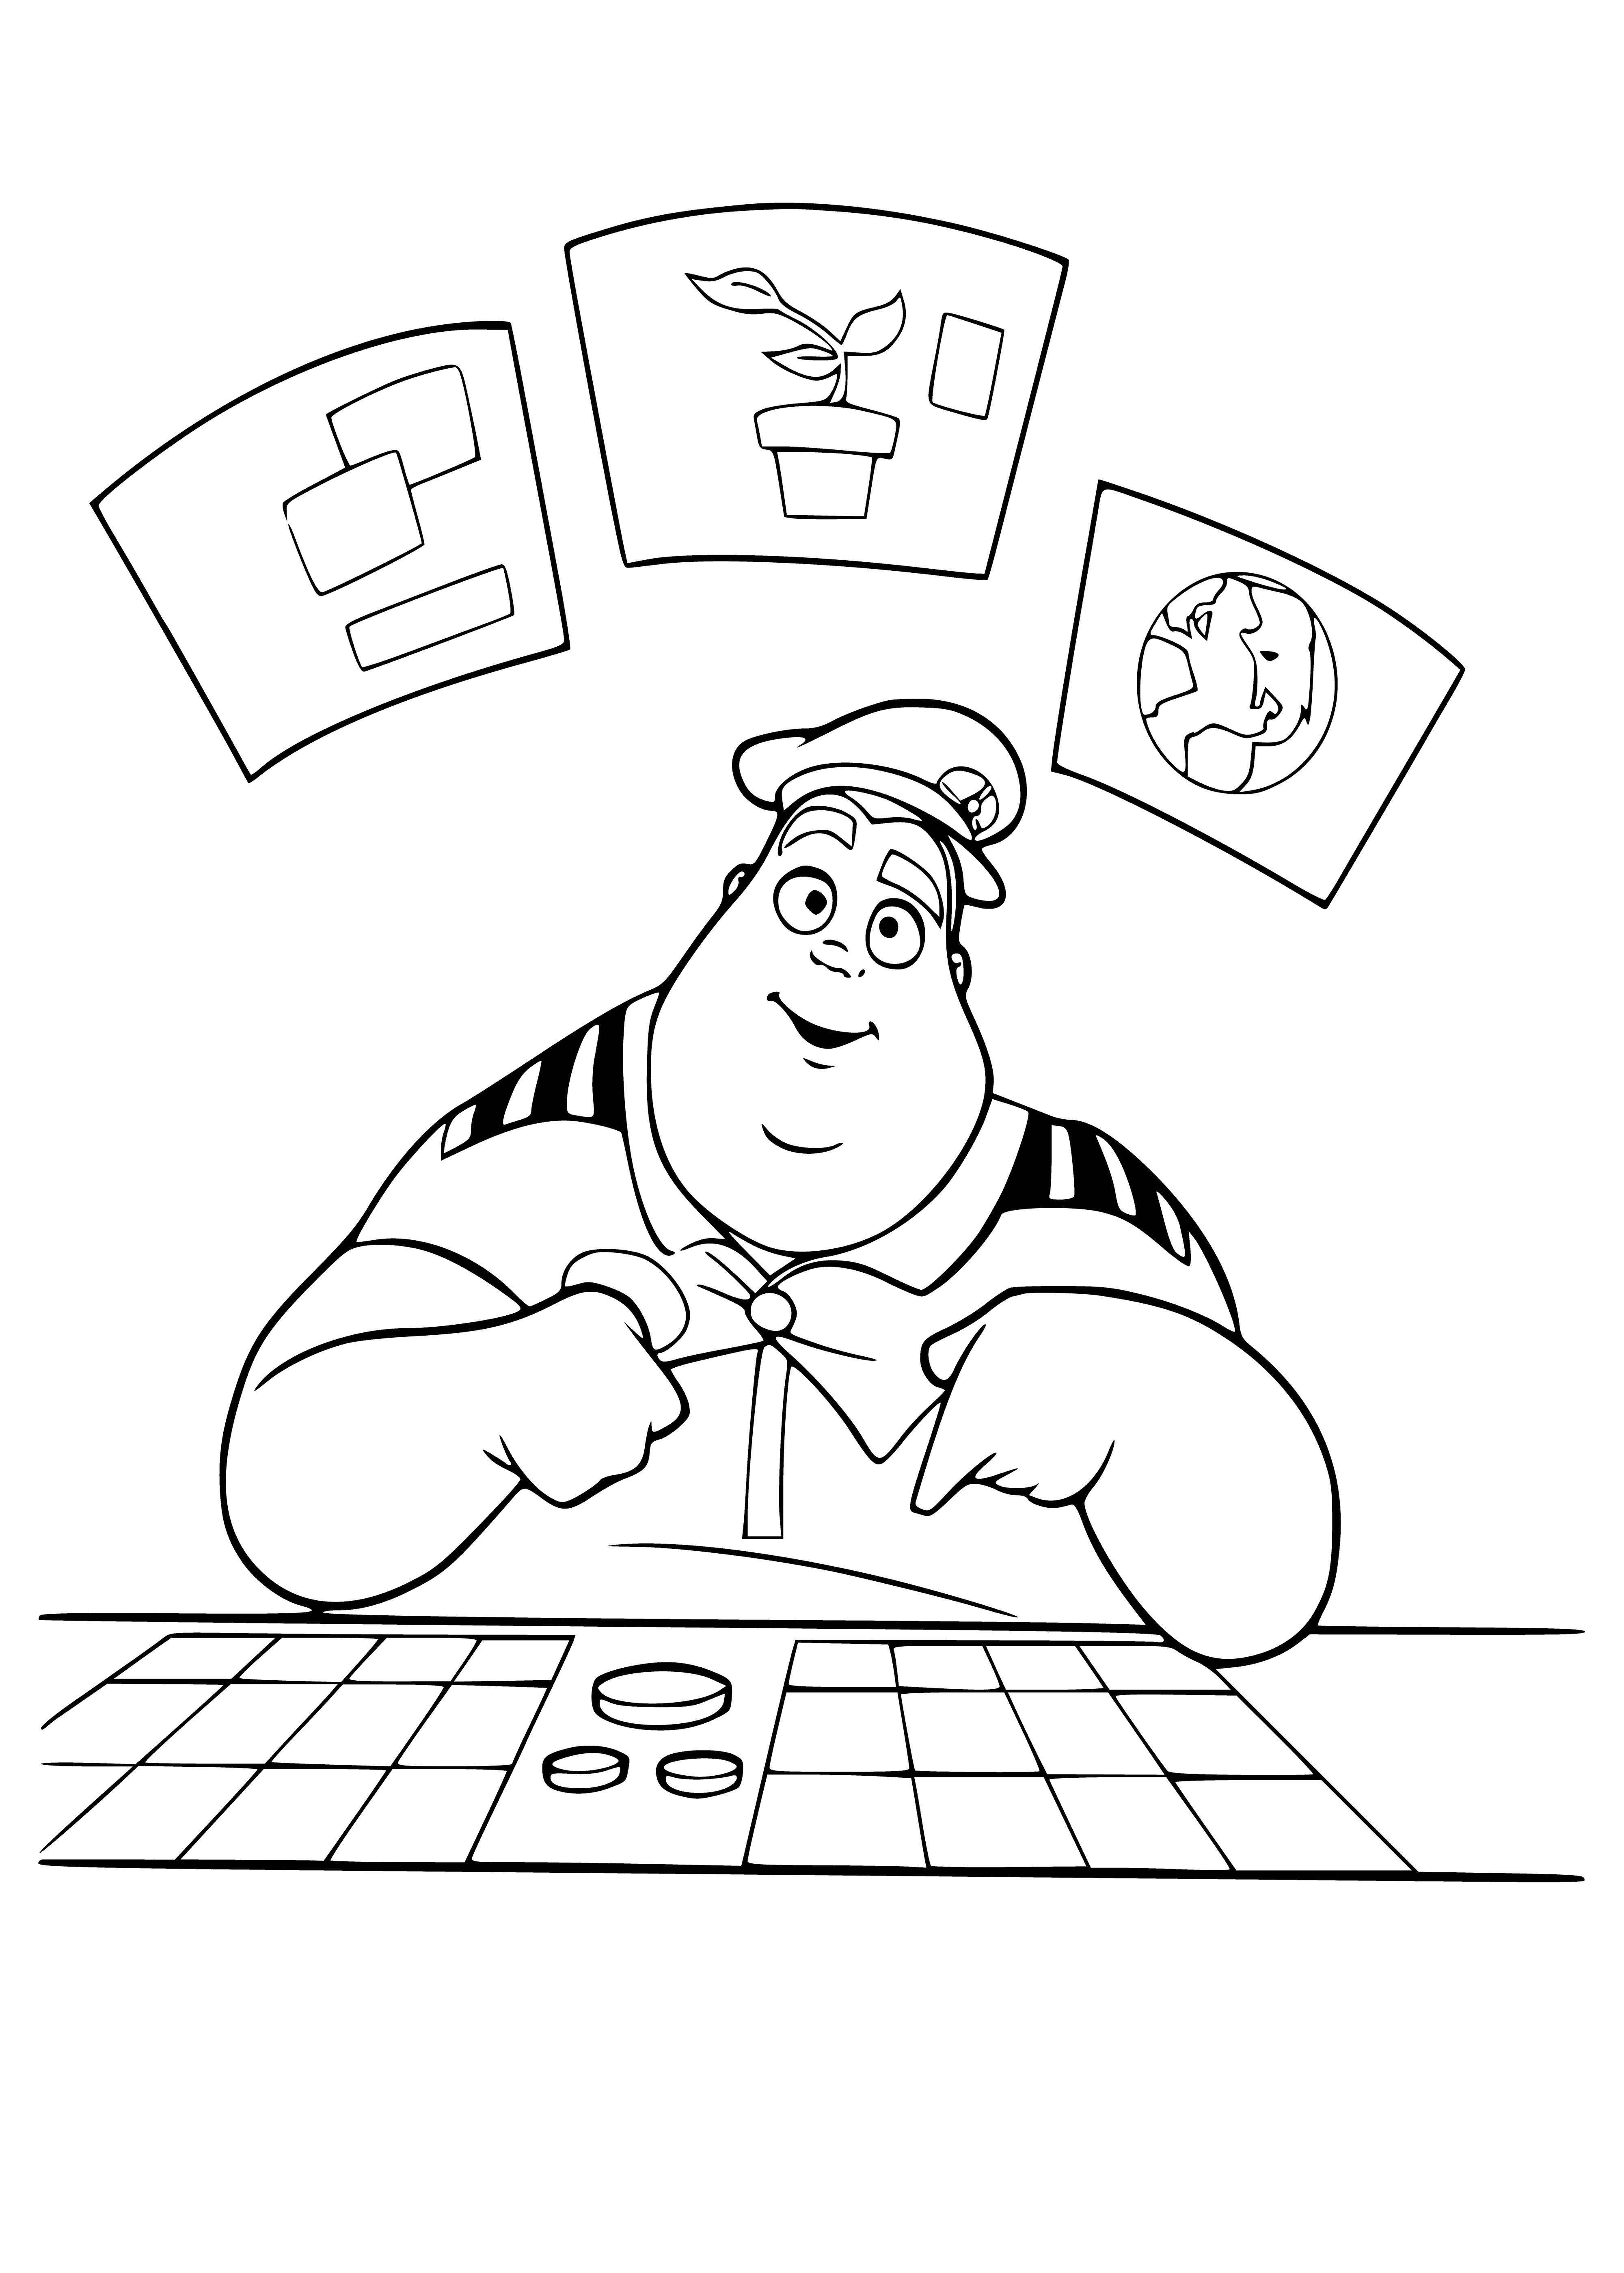 Captain of the ship coloring page